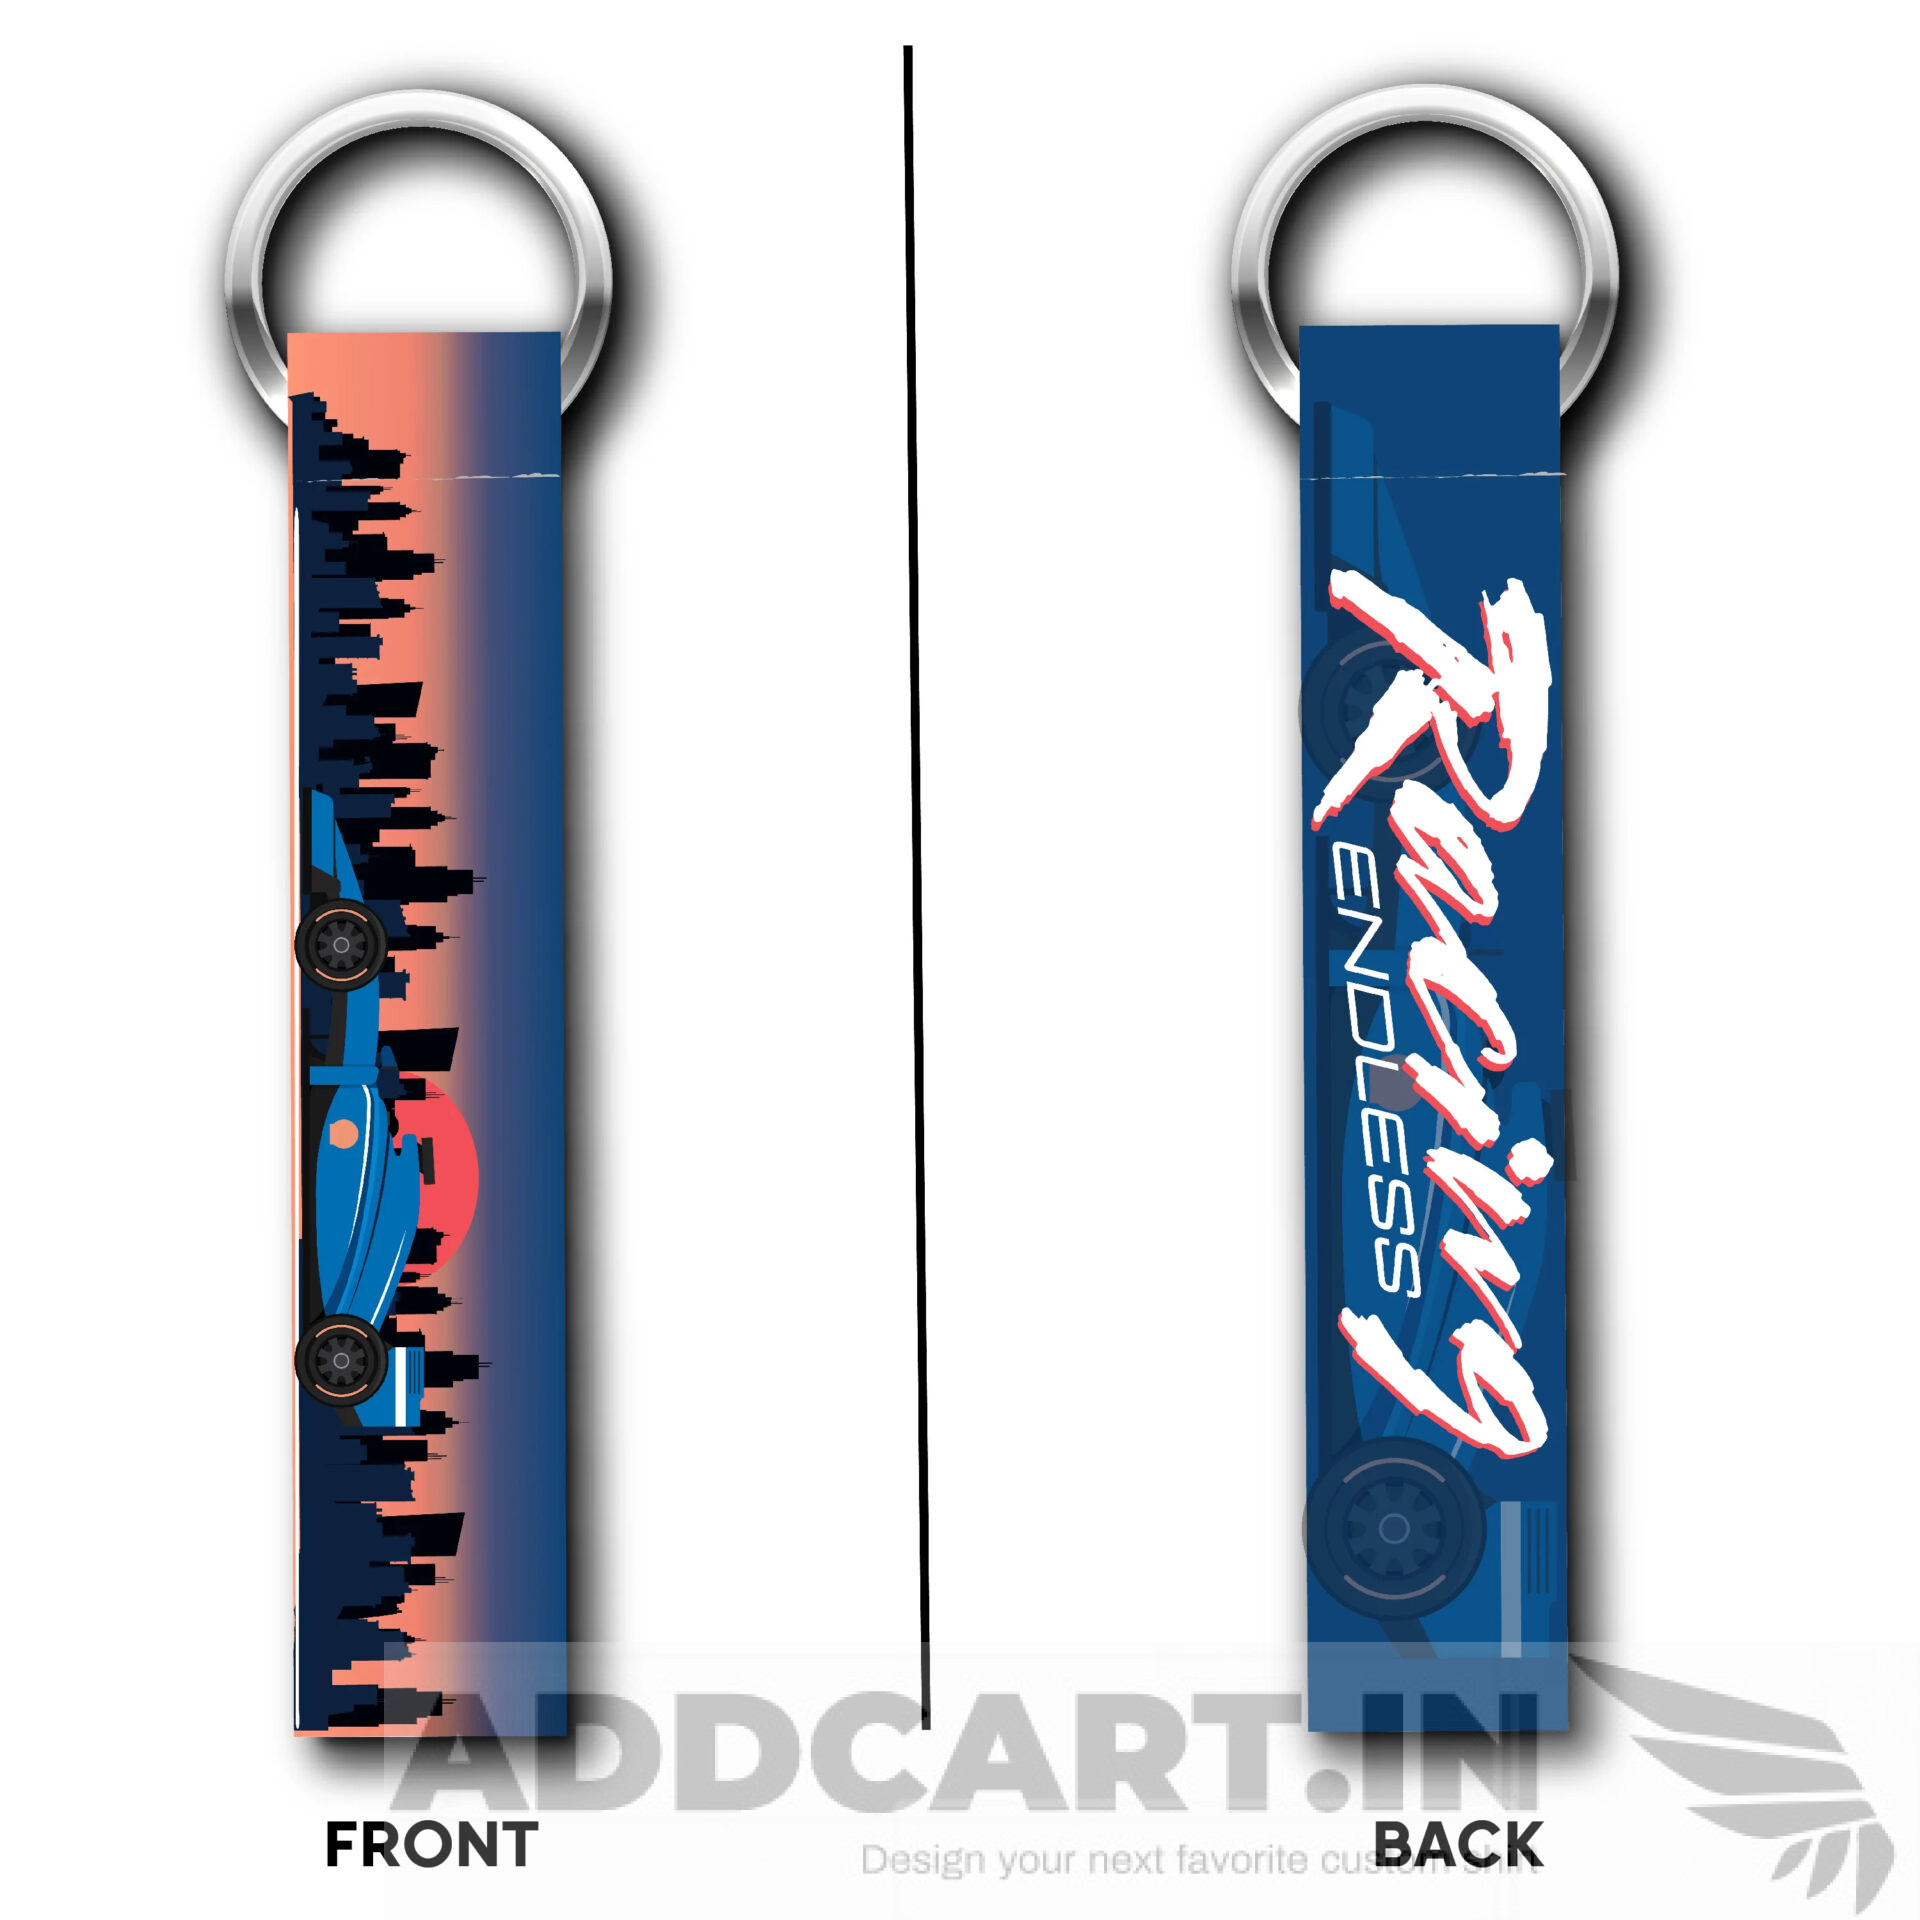 Raceing Limitless KeyTag